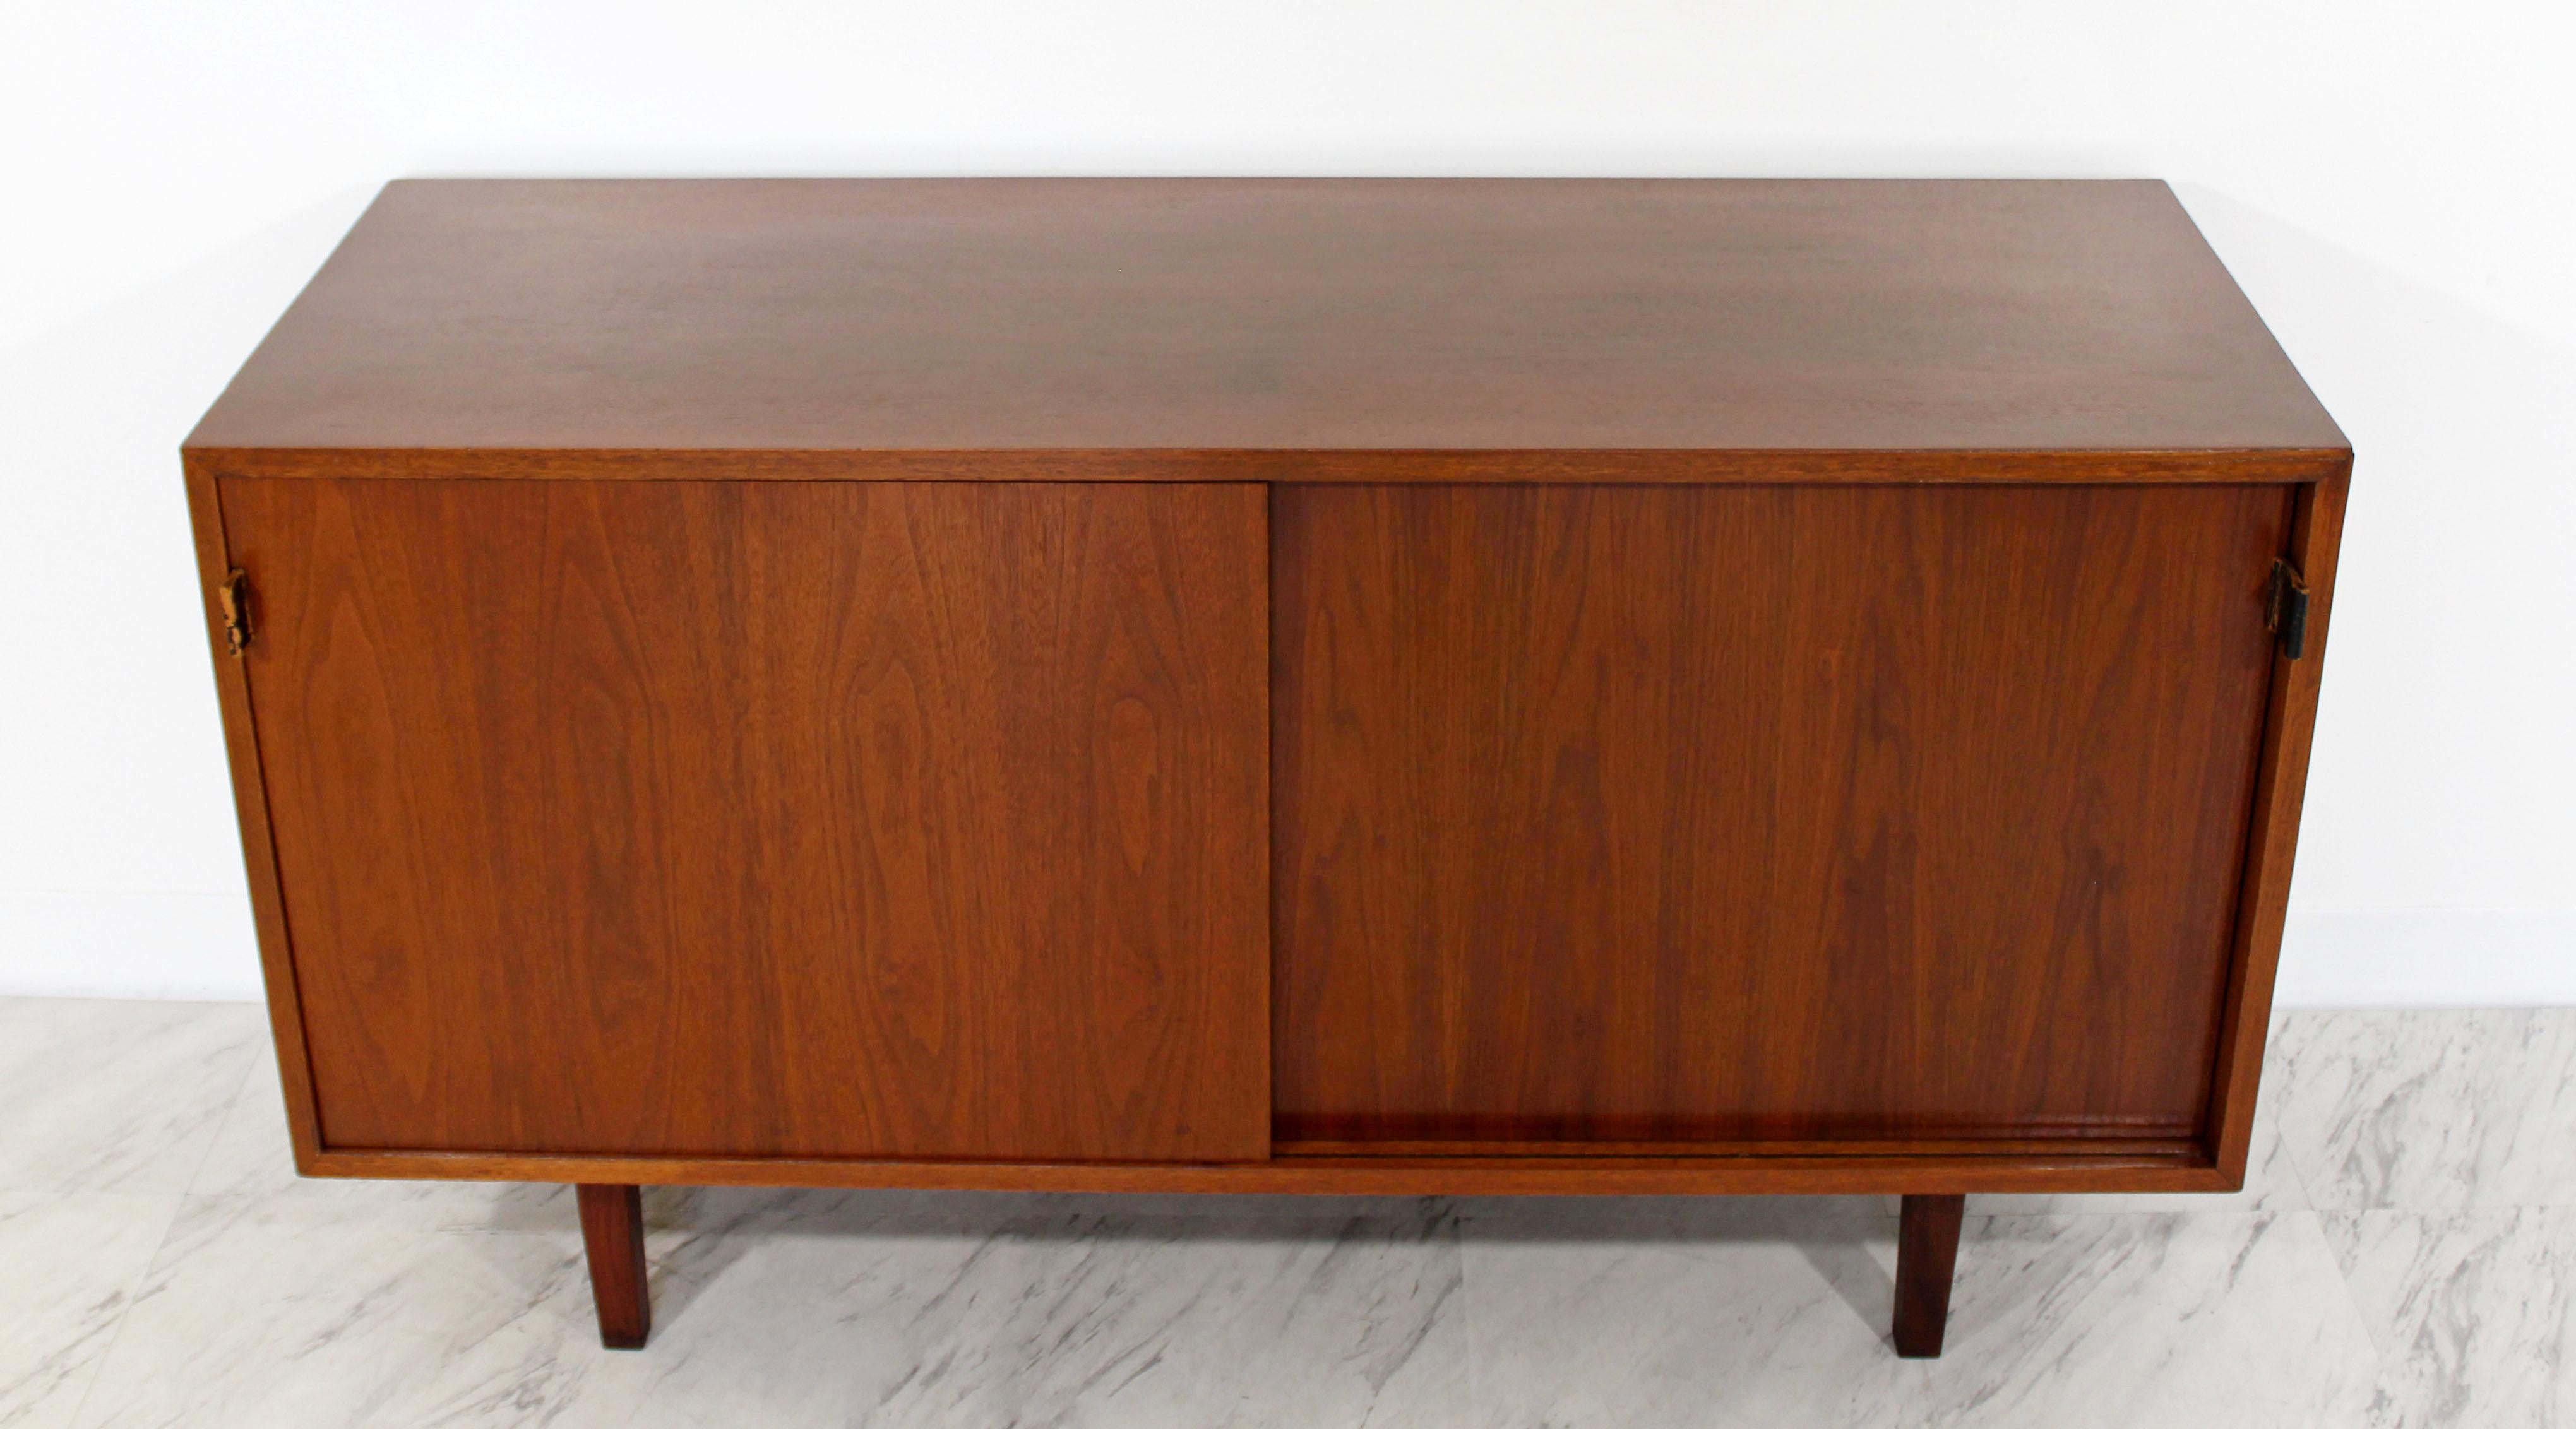 For your consideration is a captivating early version walnut credenza, with sliding doors that have leather pulls and three shelves, by Florence Knoll, circa the 1960s. In very good condition. The dimensions are 48